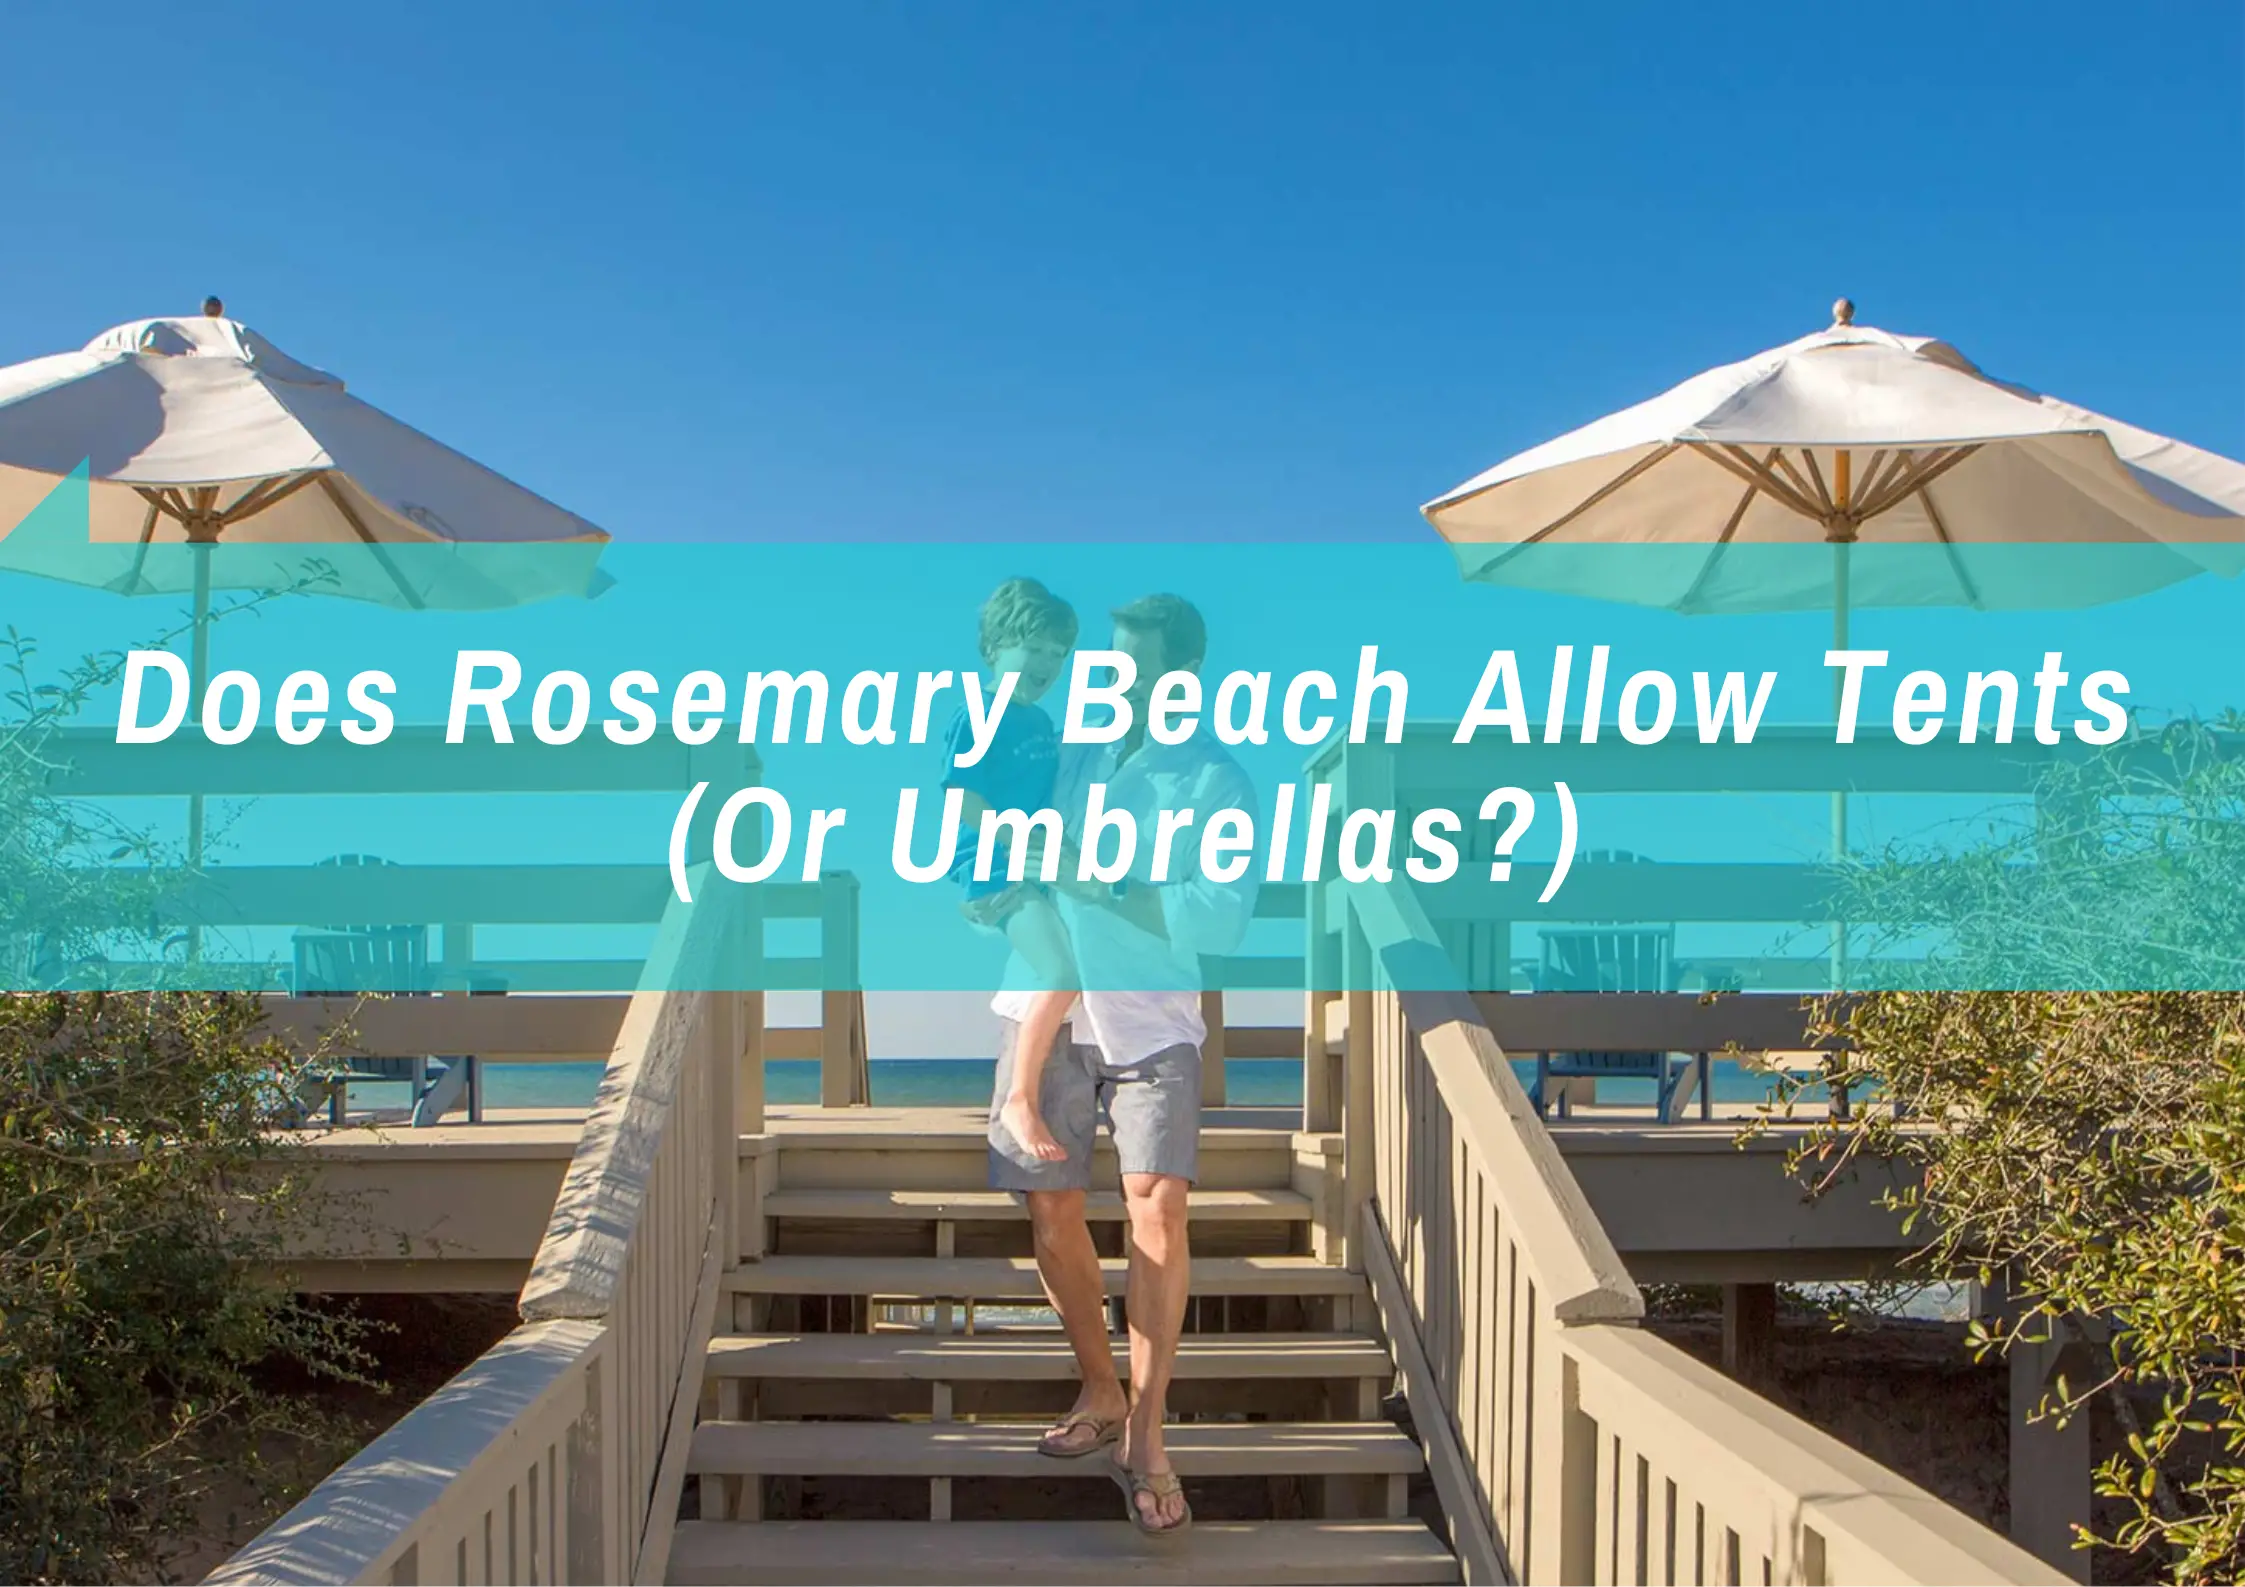 Does Rosemary Beach Allow Tents (Or Umbrellas?)